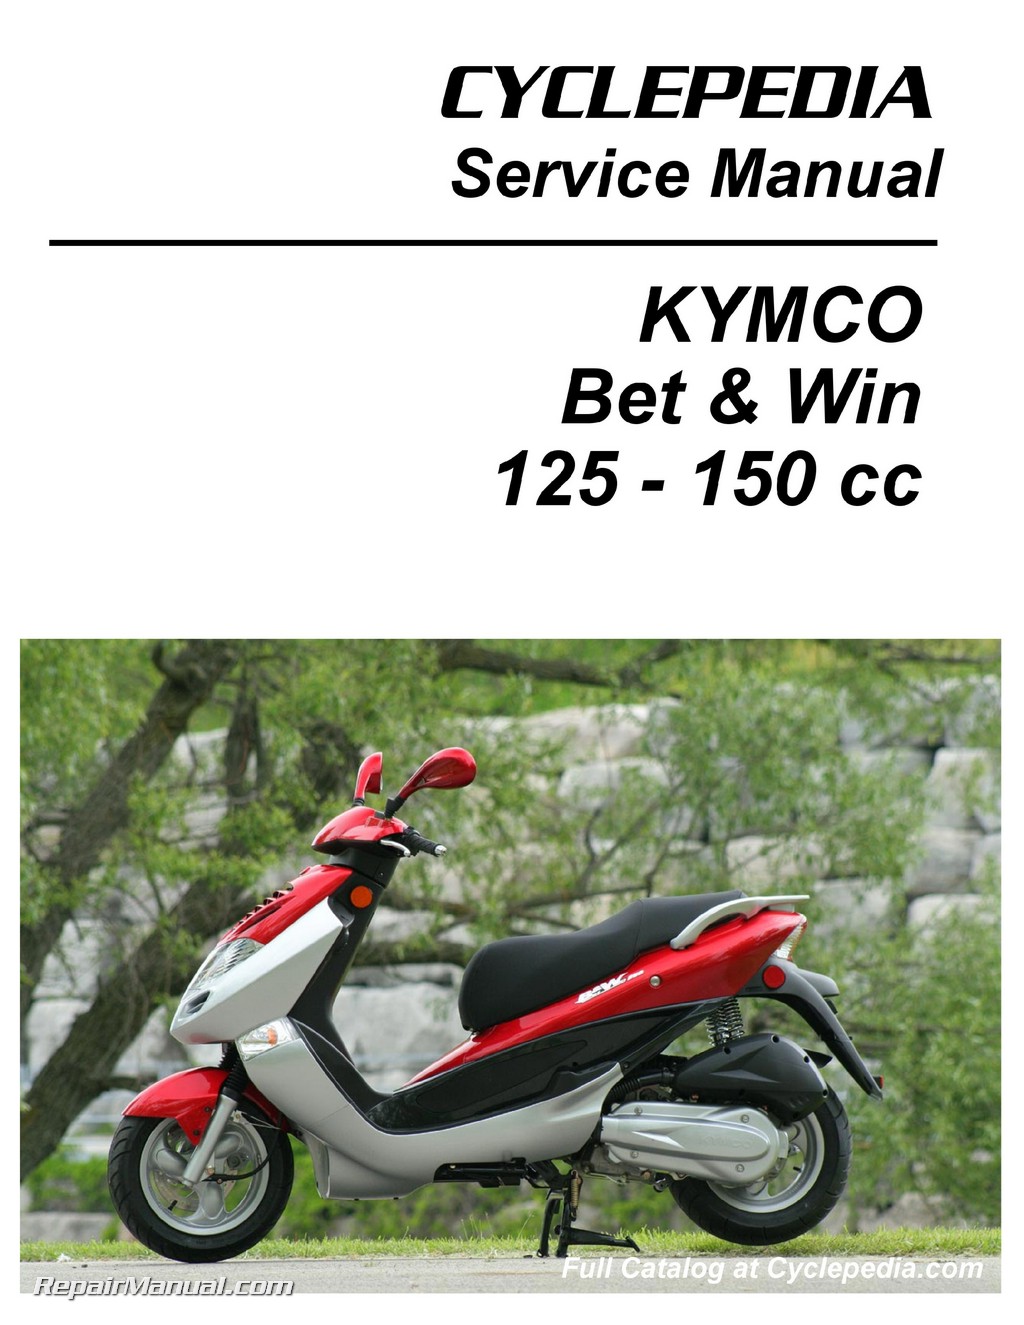 2004 Kymco Bet and Win 125 #7